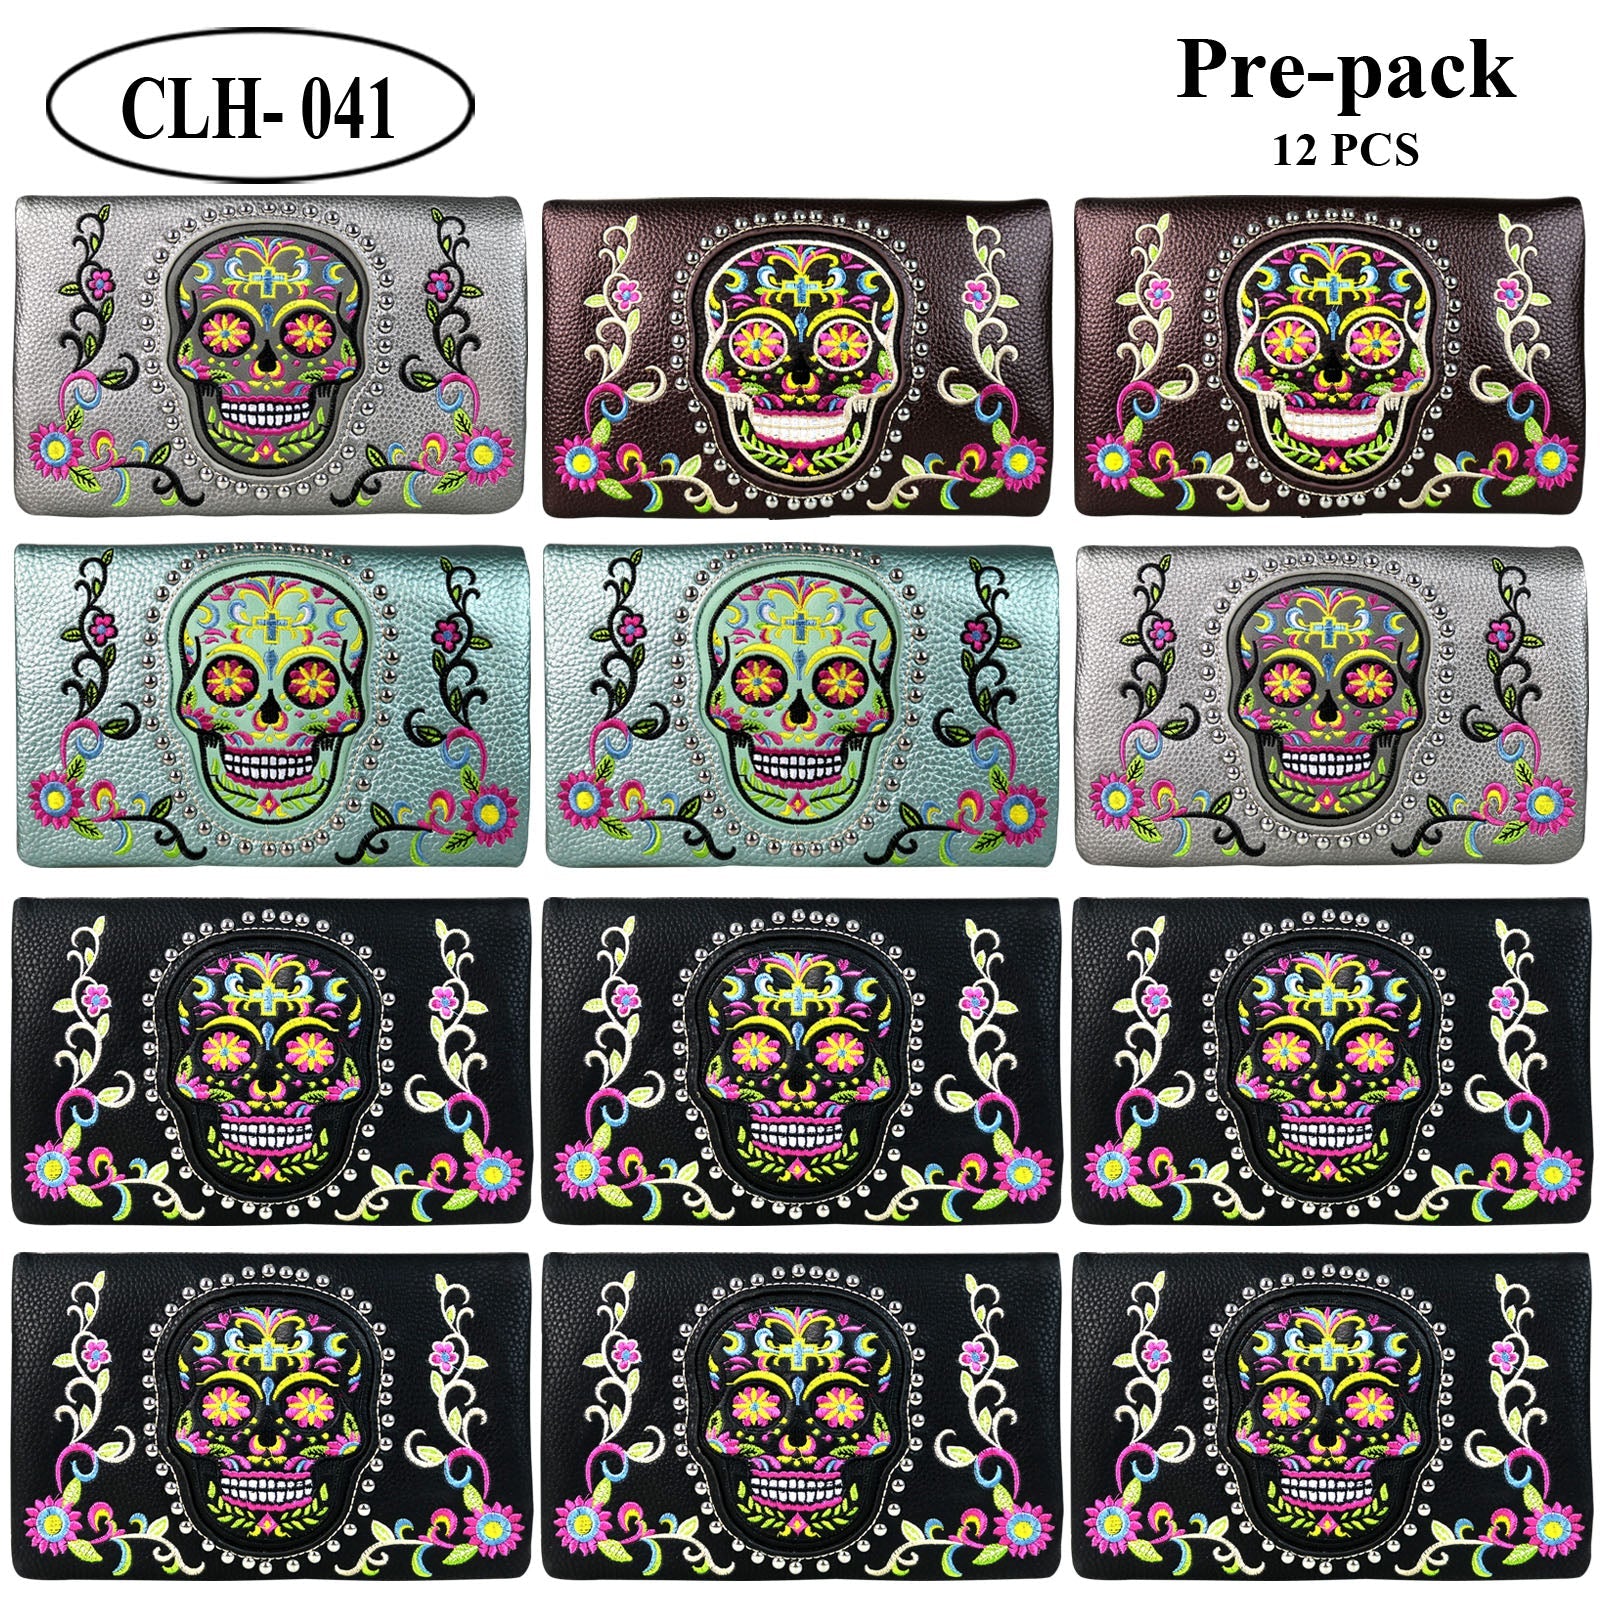 American Bling Sugar Skull Clutch Pre-Pack Assorted Color (12PCS) - Cowgirl Wear